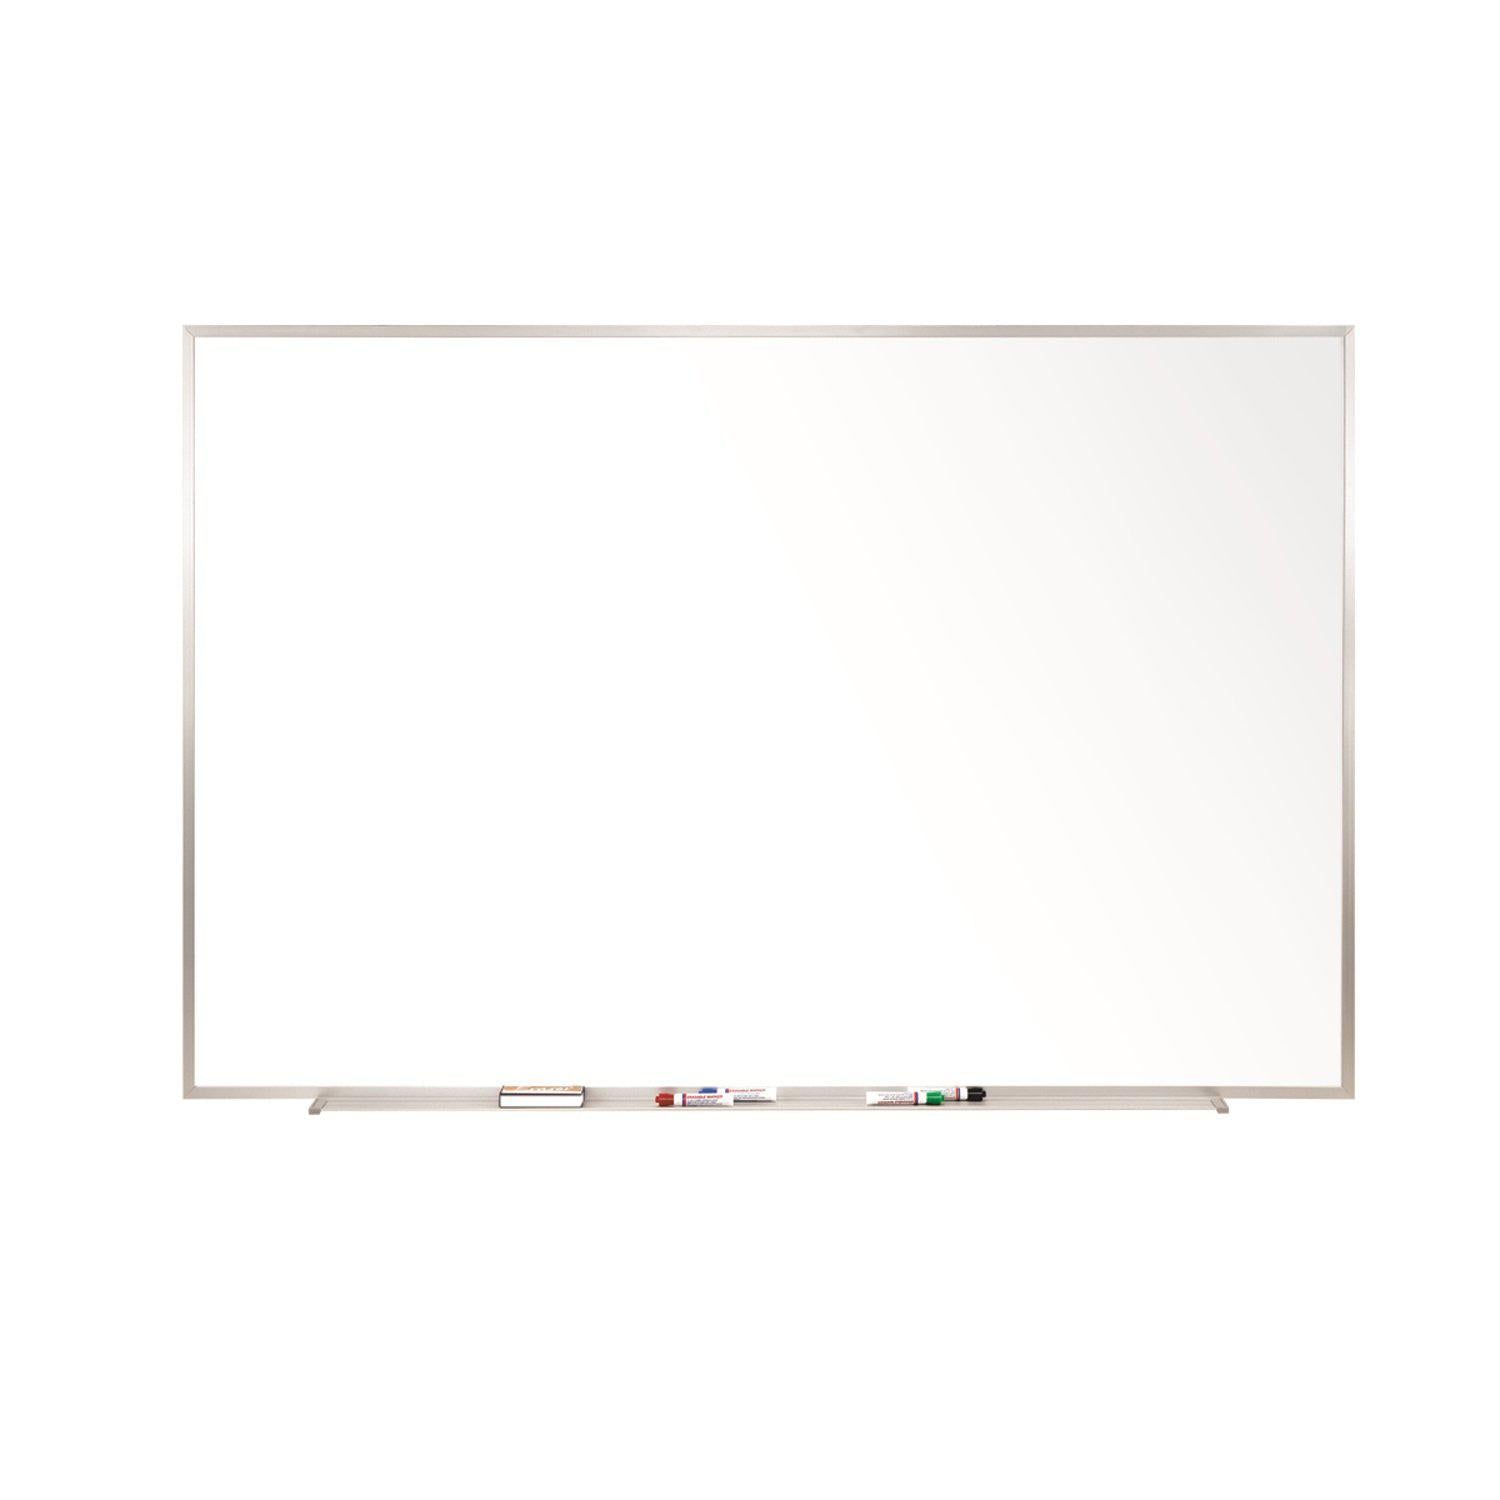 Whiteboard Stands And Whiteboards - Set Of 6